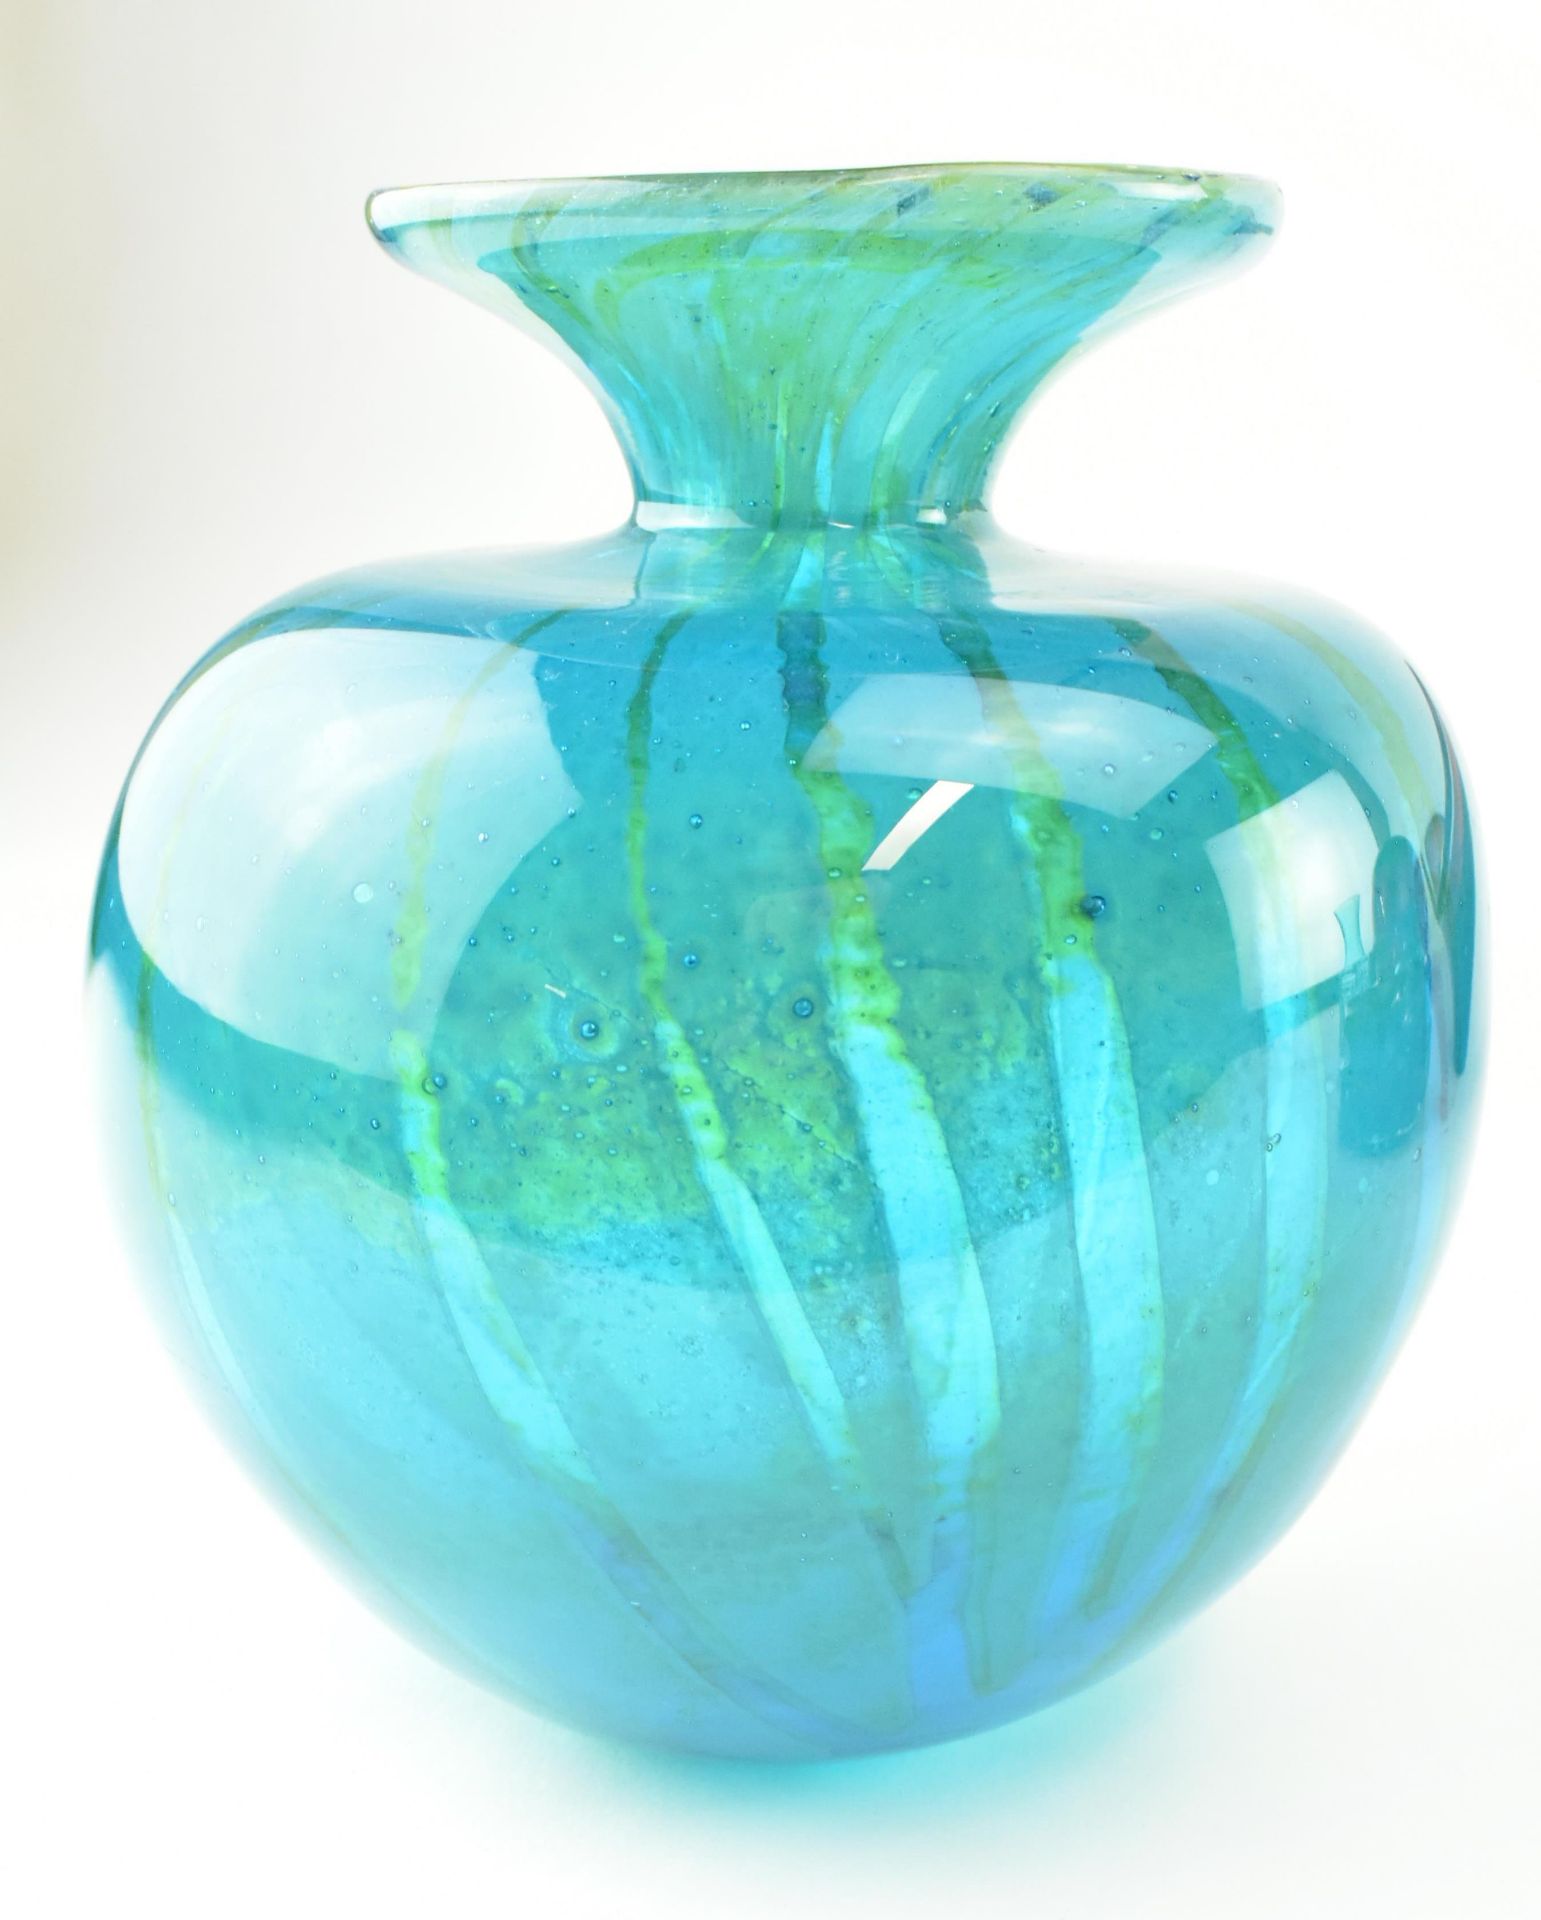 COLLECTION OF VINTAGE 20TH CENTURY STUDIO ART GLASS - Image 3 of 6